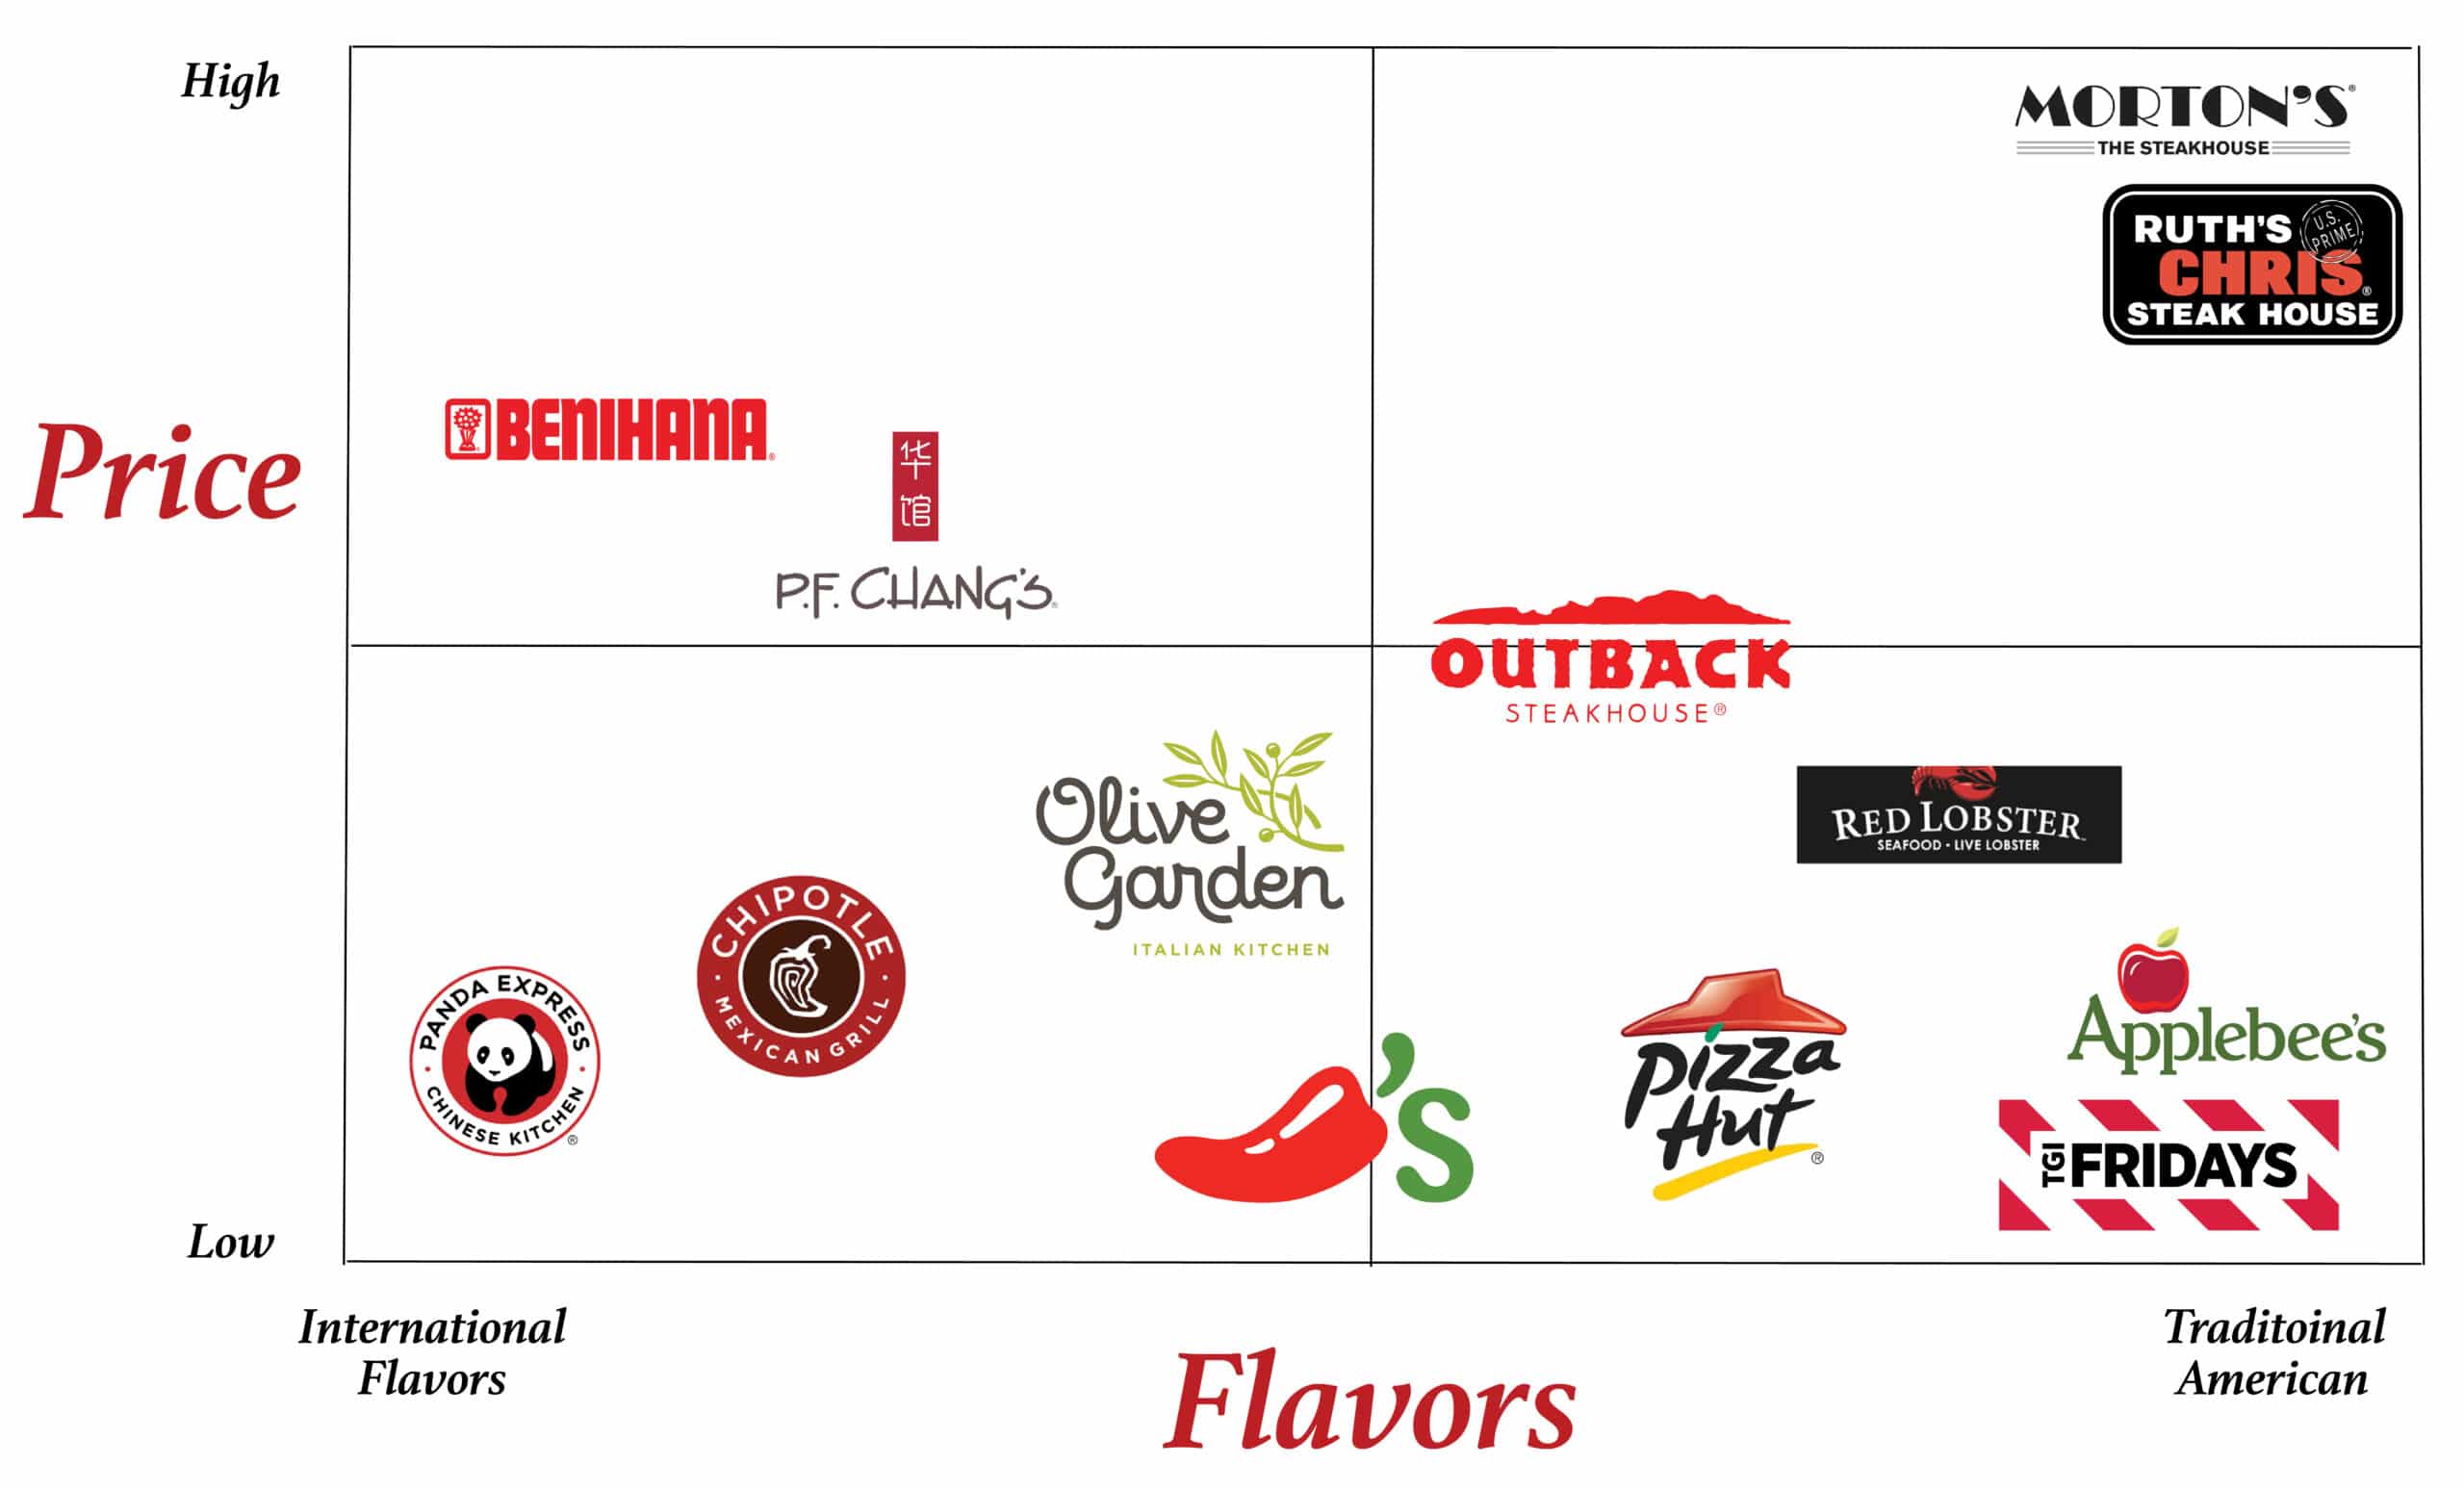 Using a brand positioning map